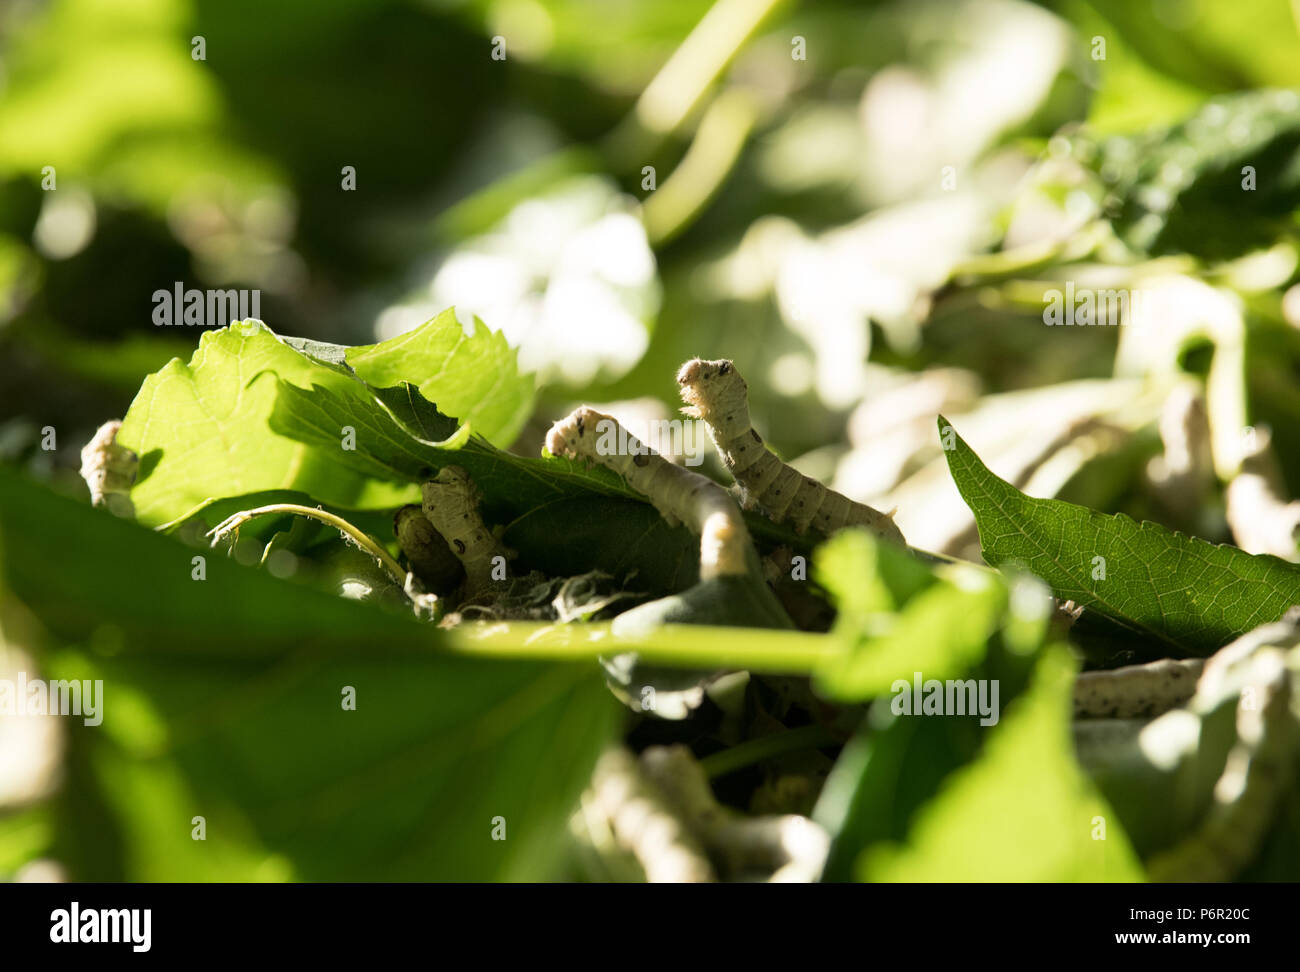 Chun'an, China's Zhejiang Province. 9th May, 2018. Silkworms are seen at a silkworm breeding base of Cathaya Group in Xiajiang Village of Chun'an County, east China's Zhejiang Province, May 9, 2018. Chun'an County cooperated with Cathaya Group in building silkworm breeding bases to produce high quality cocoon and silk products. To date, about 4,000 hectares mulberry bushes have been cultivated and some 300 tonnes raw silk are produced per year. Credit: Weng Xinyang/Xinhua/Alamy Live News Stock Photo